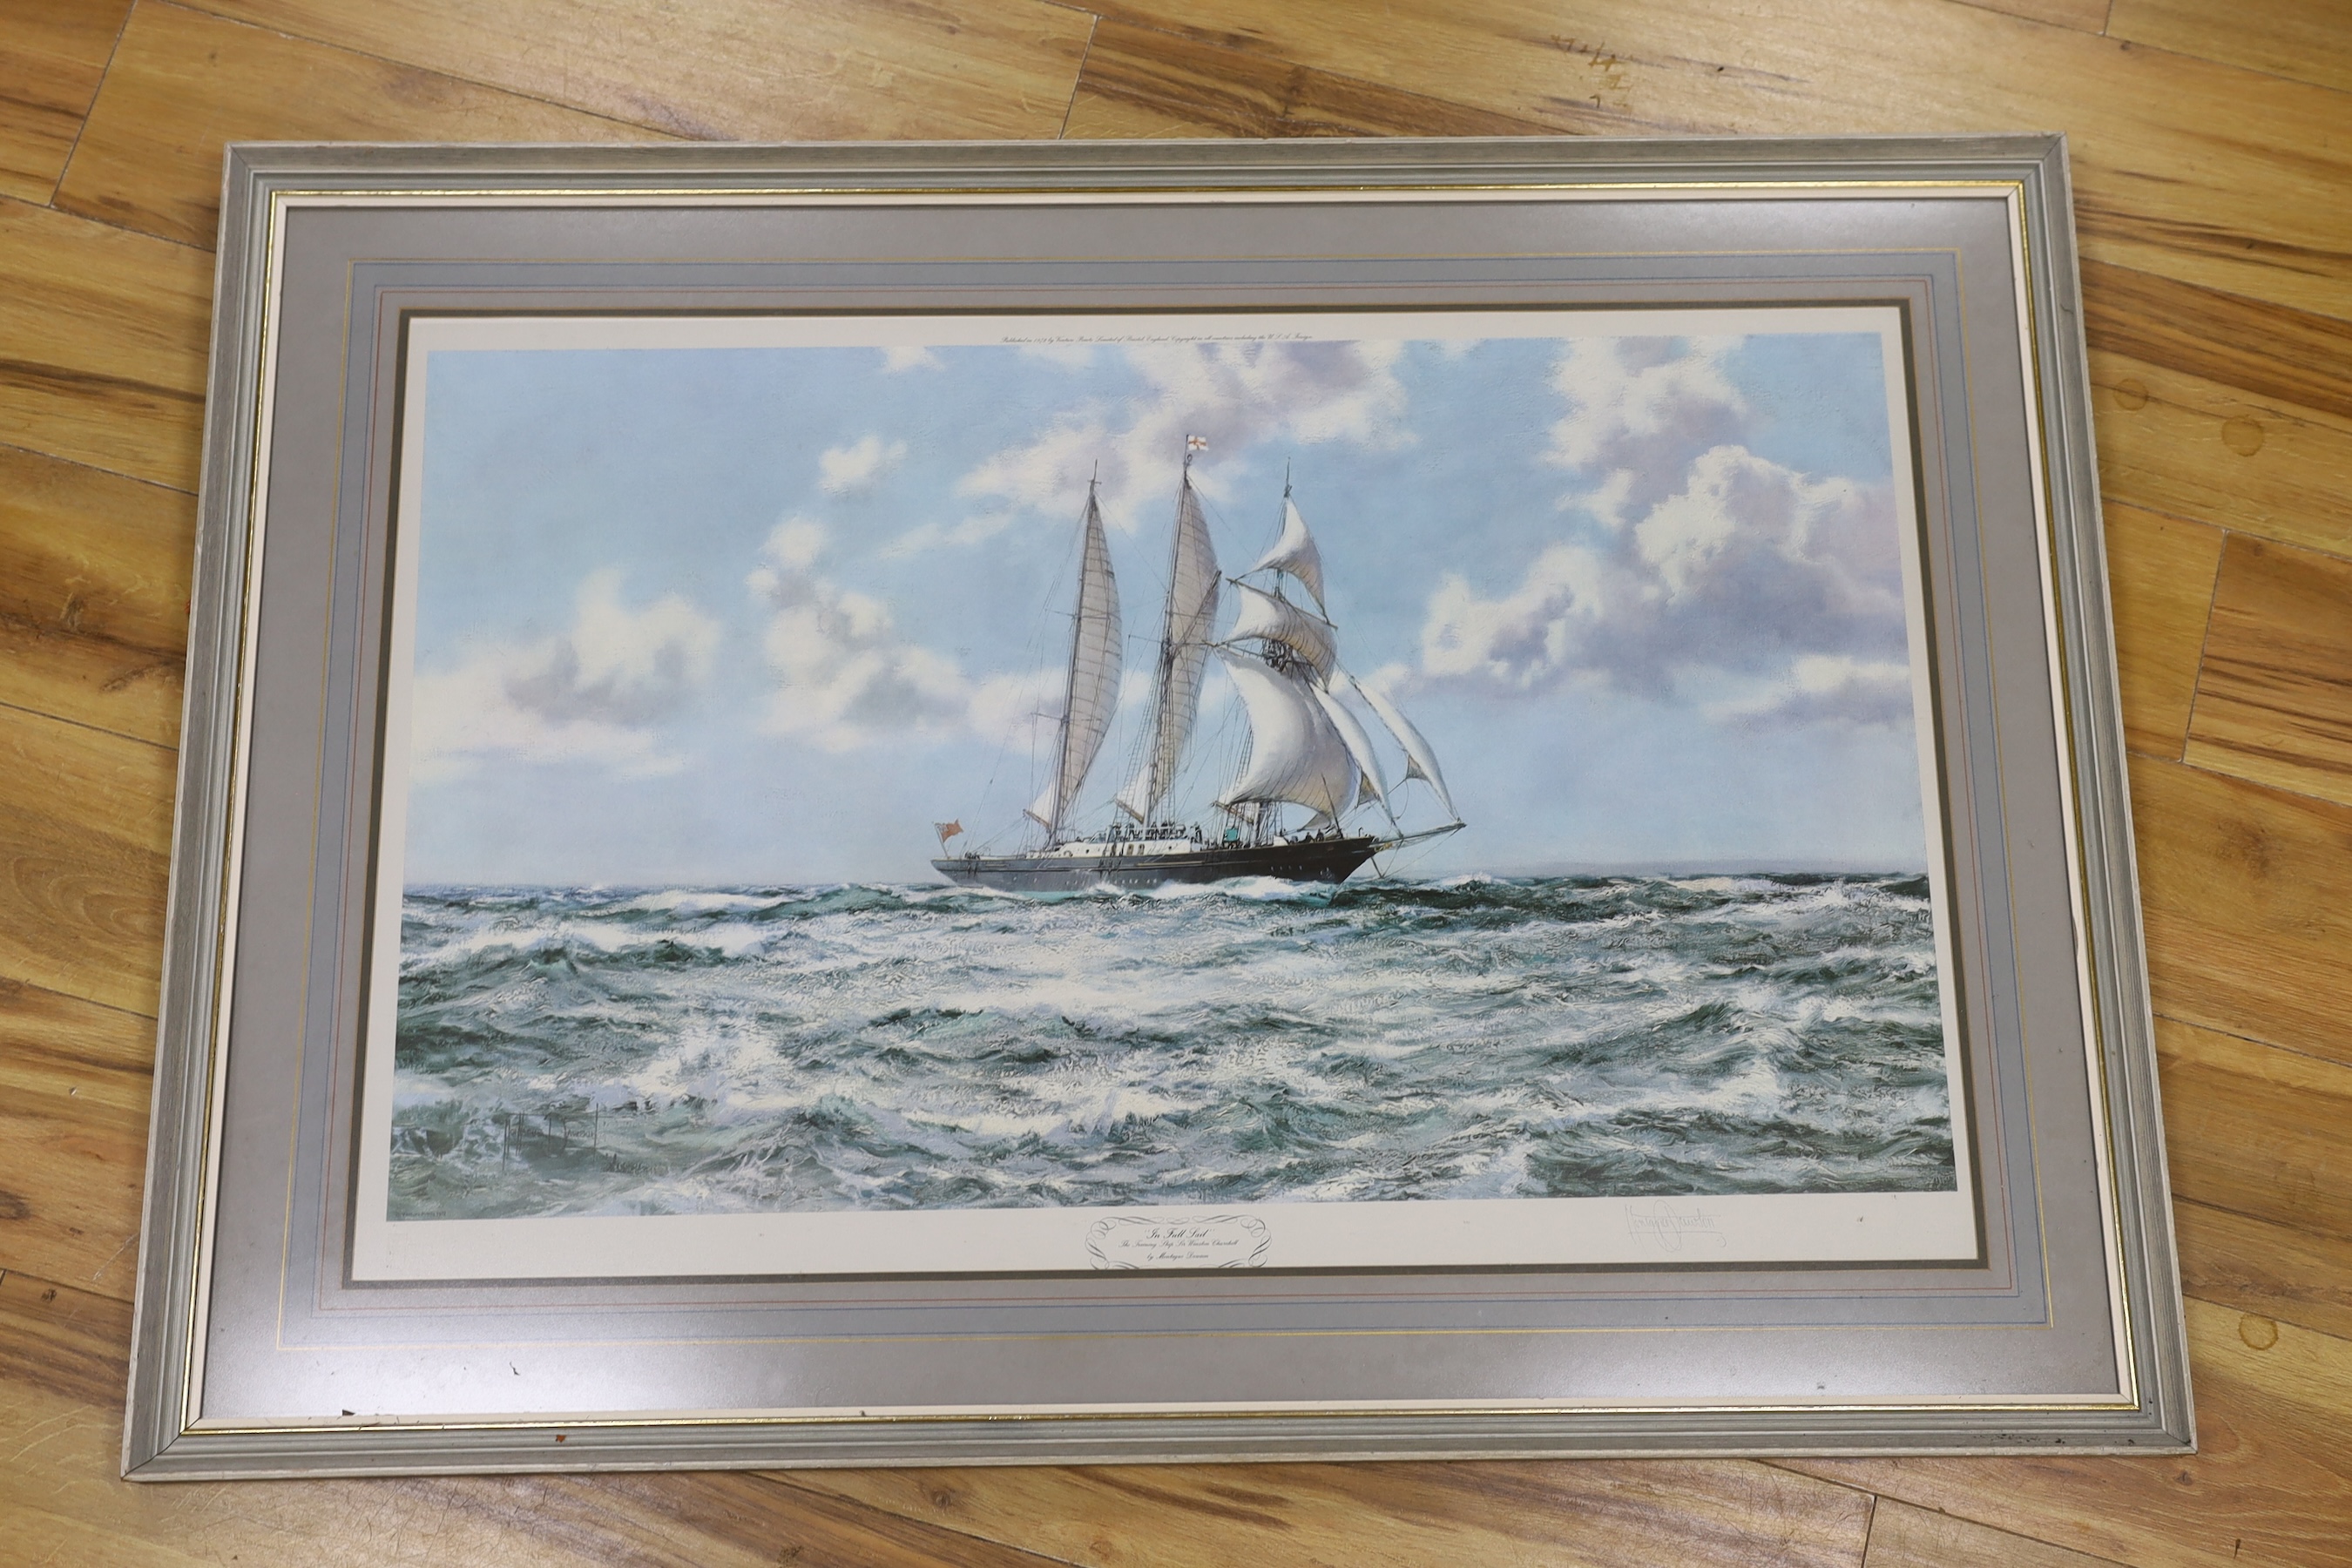 Montague Dawson, signed limited edition print, 'In Full Sail' - the training ship Sir Winston Churchill', signed in pencil, 59 x 94cm